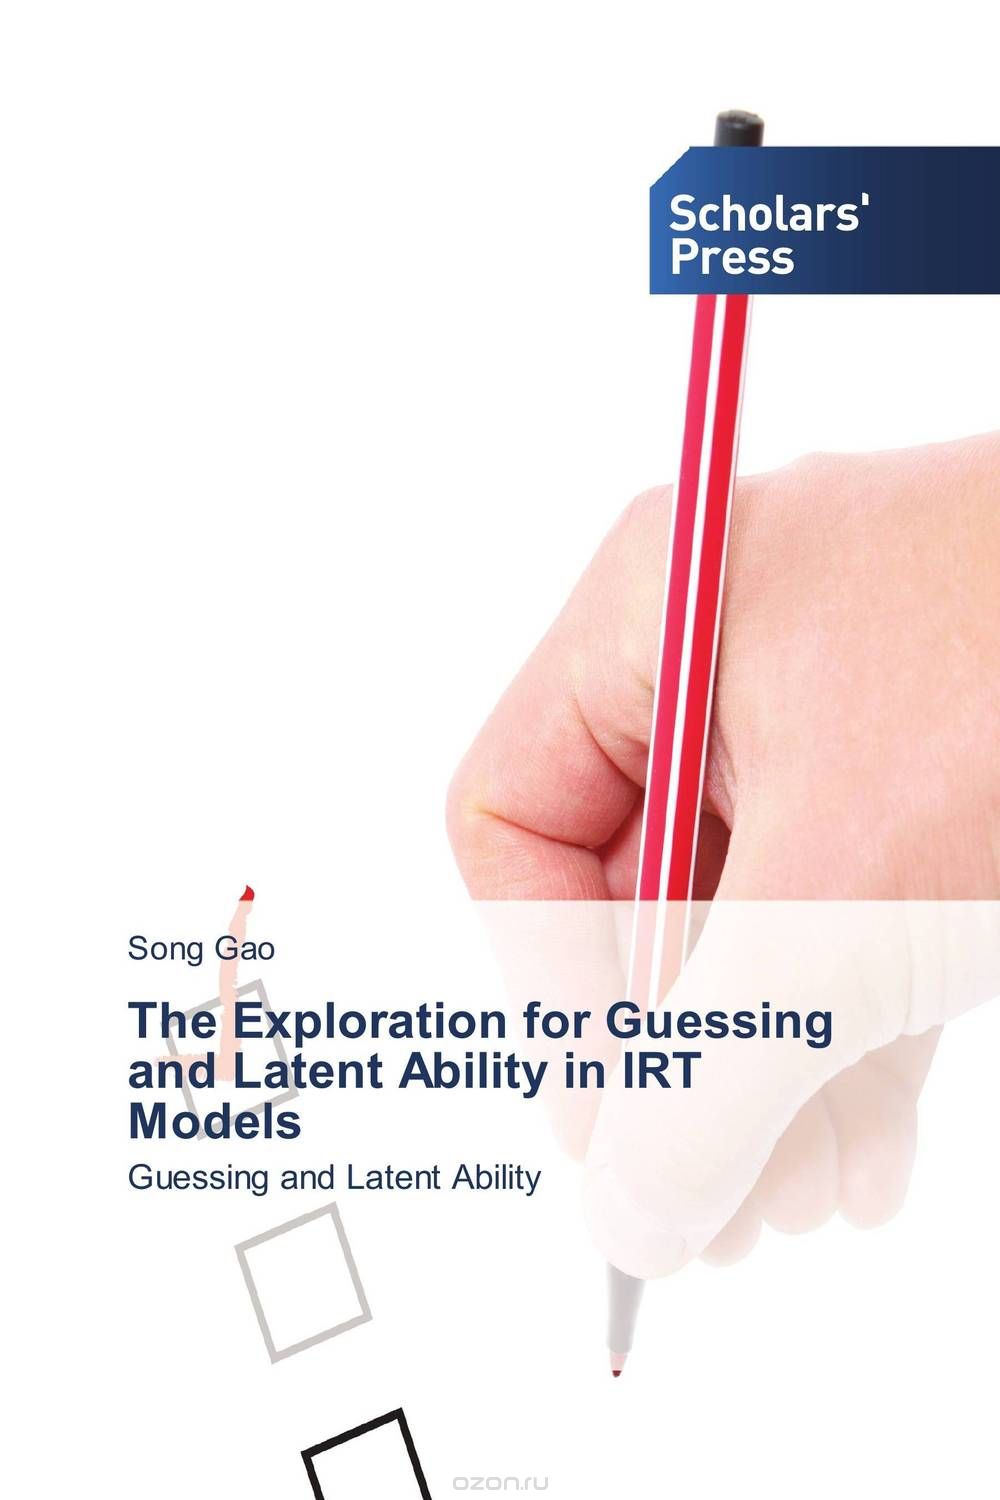 Скачать книгу "The Exploration for Guessing and Latent Ability in IRT Models"